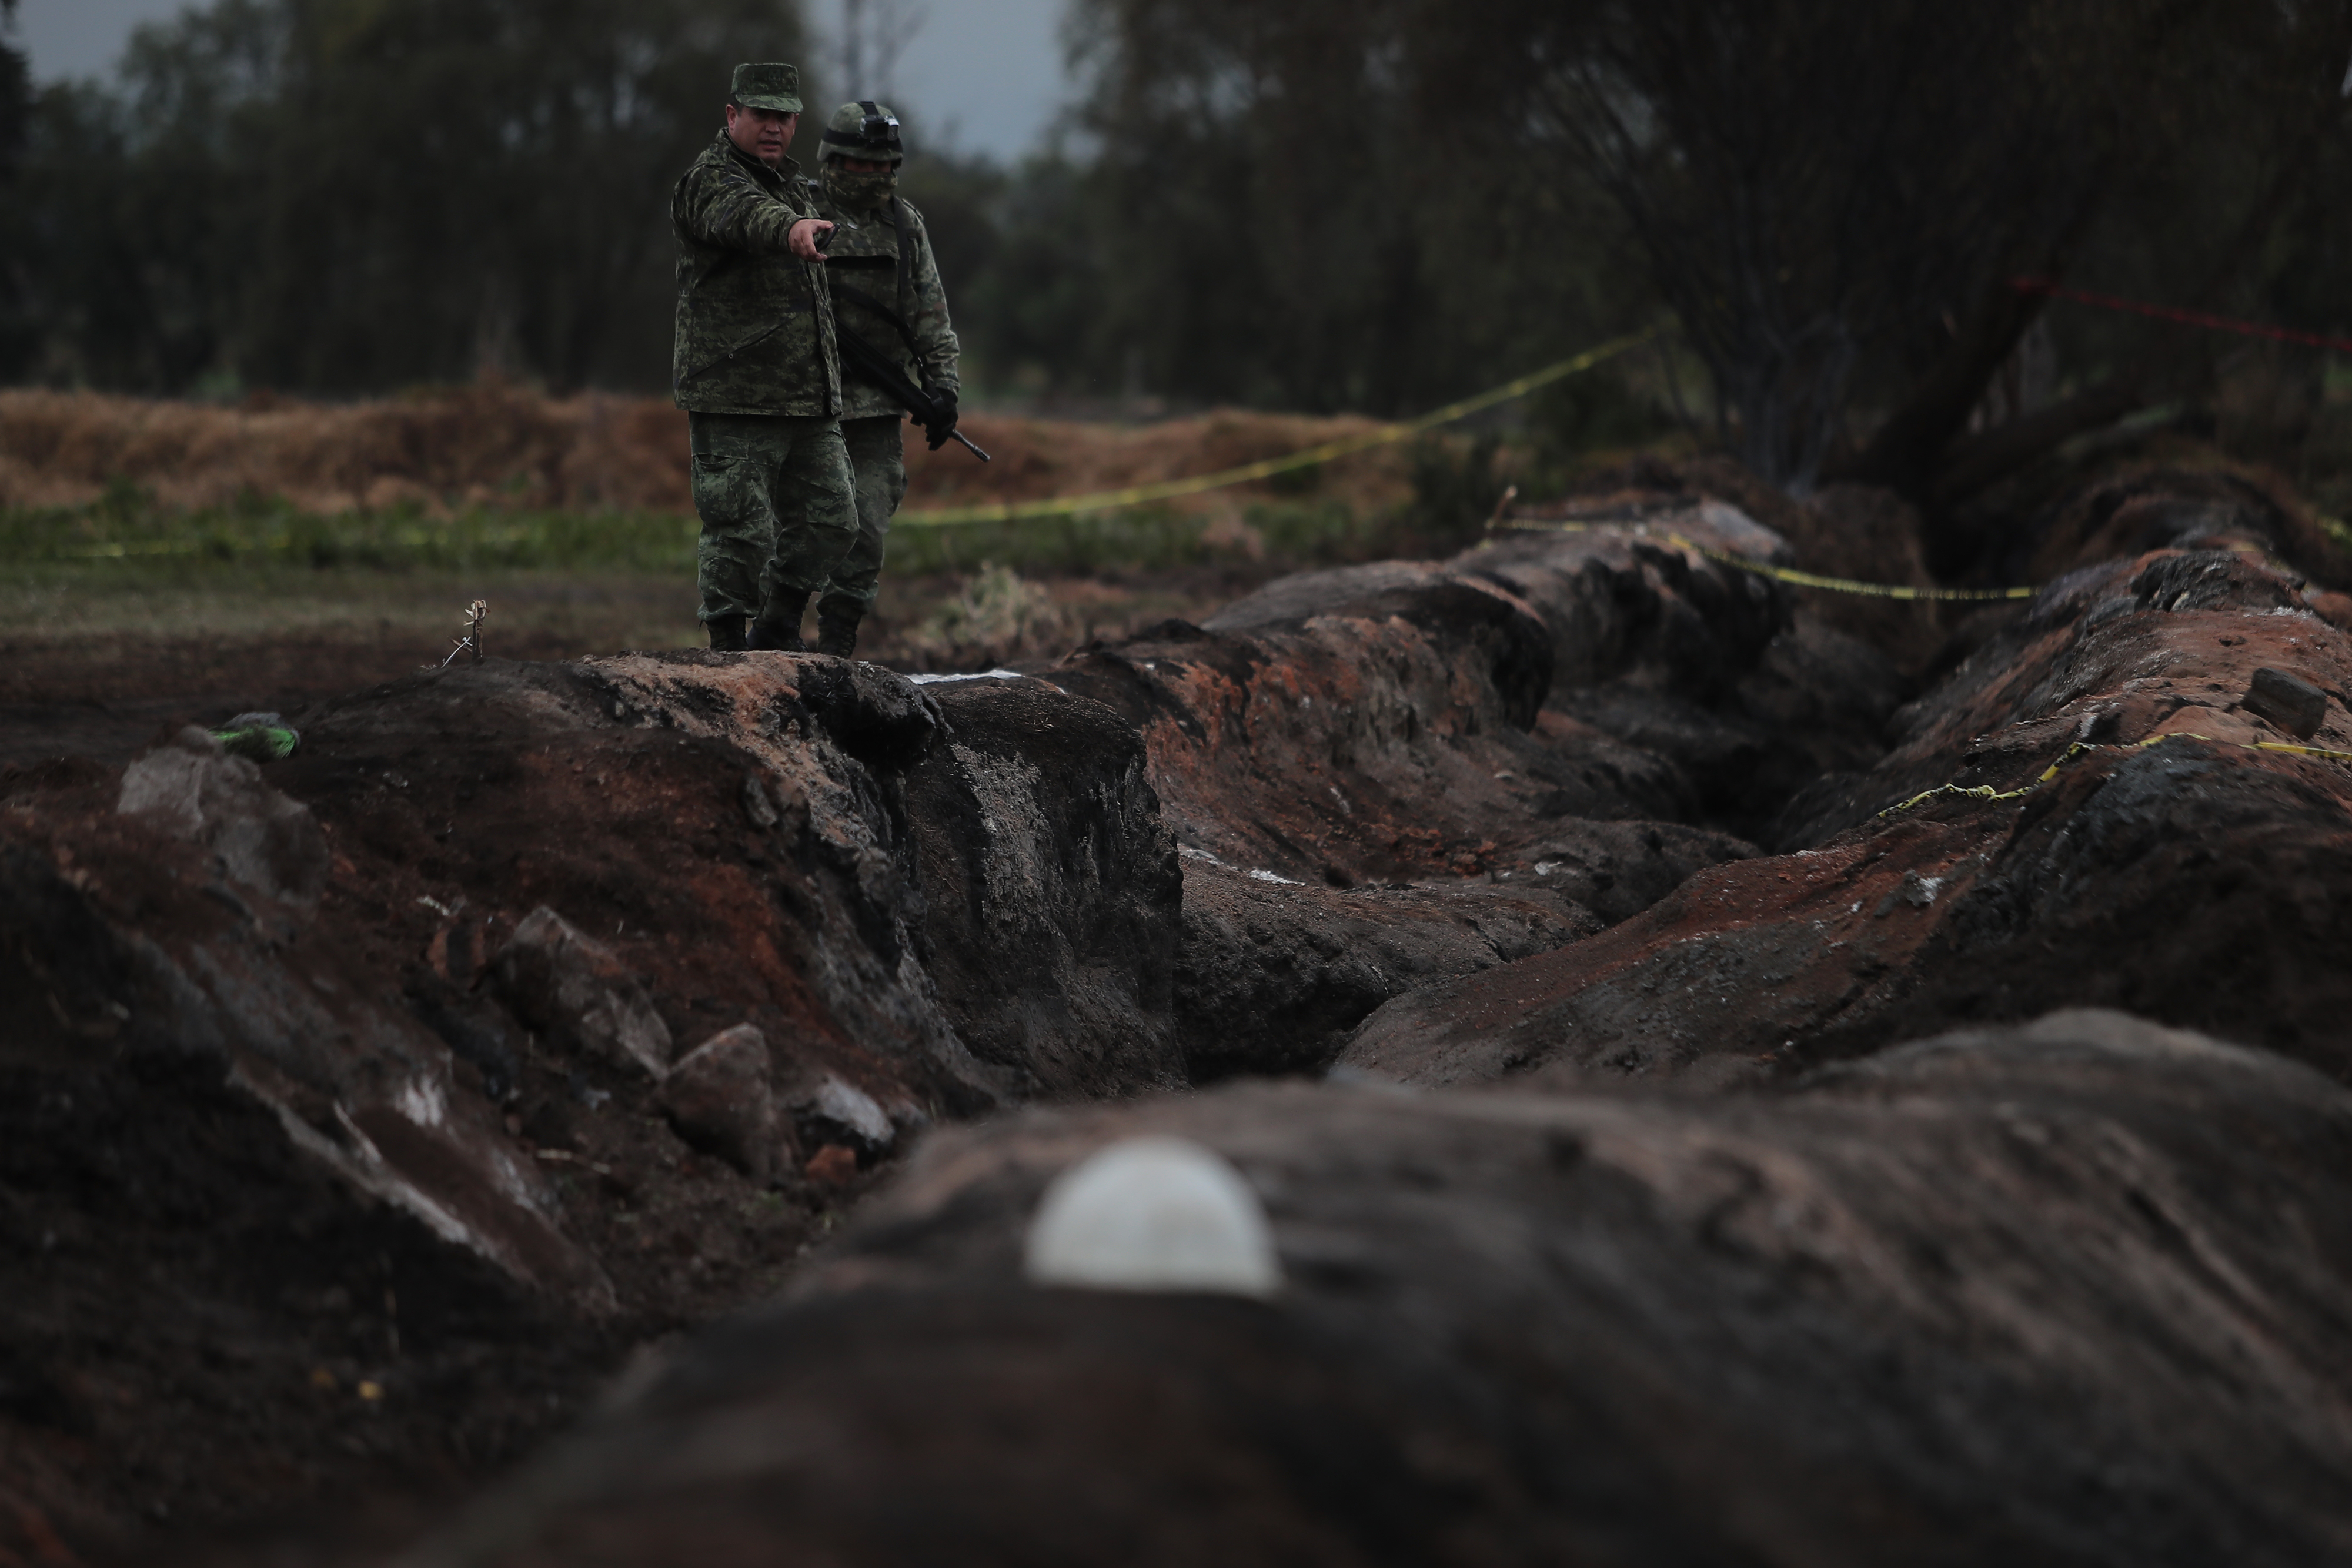 TLAHUELILPAN, MEXICO - JANUARY 20: Members of the Military watch over the explosion area of the pipeline on January 20, 2019 in Tlahuelilpan, Mexico. In a statement, PEMEX announced that the explosion was caused by the illegal manipulation of the pipeline, as minutes before the accident videos were shot where people could be seen filling drums and car fuel tanks. (Photo by Hector Vivas/Getty Images)